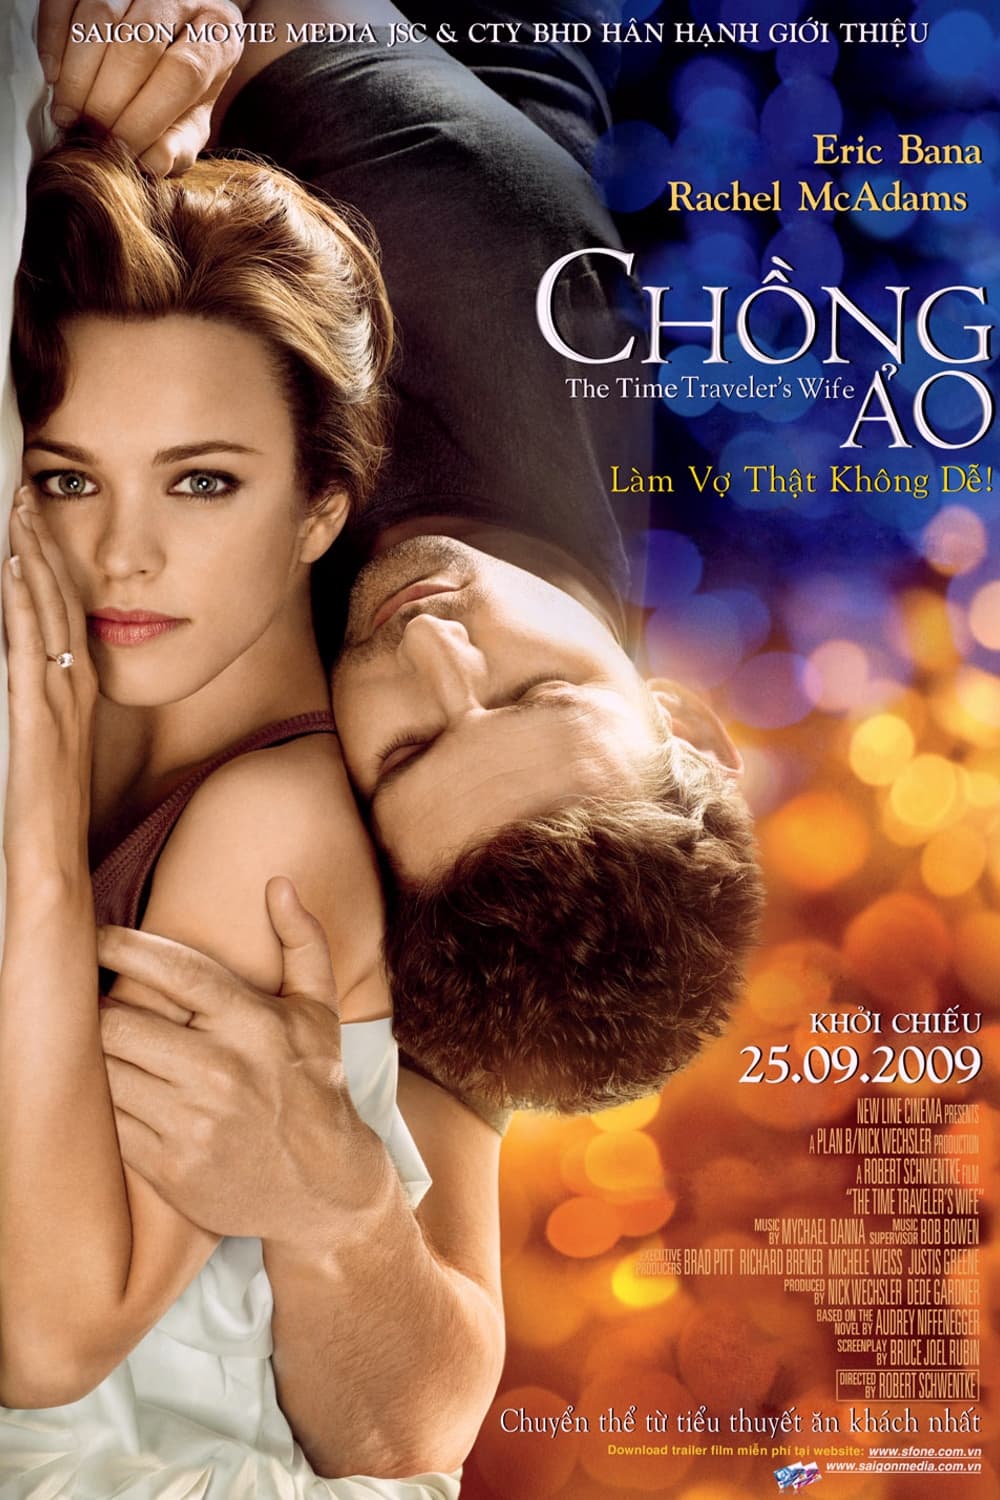 Chồng Ảo (The Time Traveler's Wife) [2009]